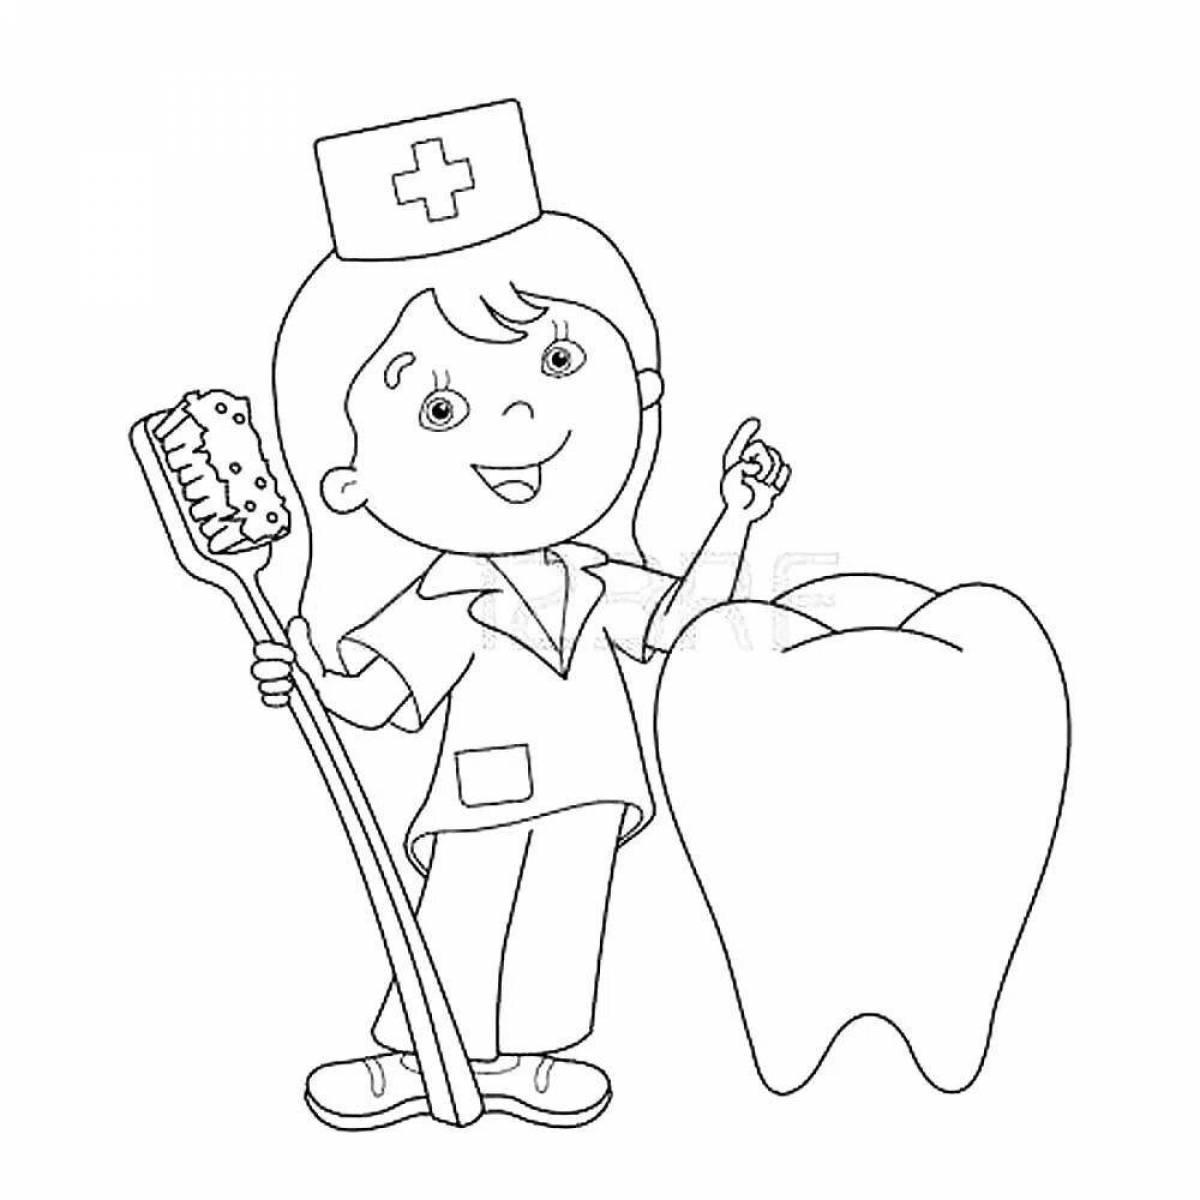 Charming dentistry coloring book